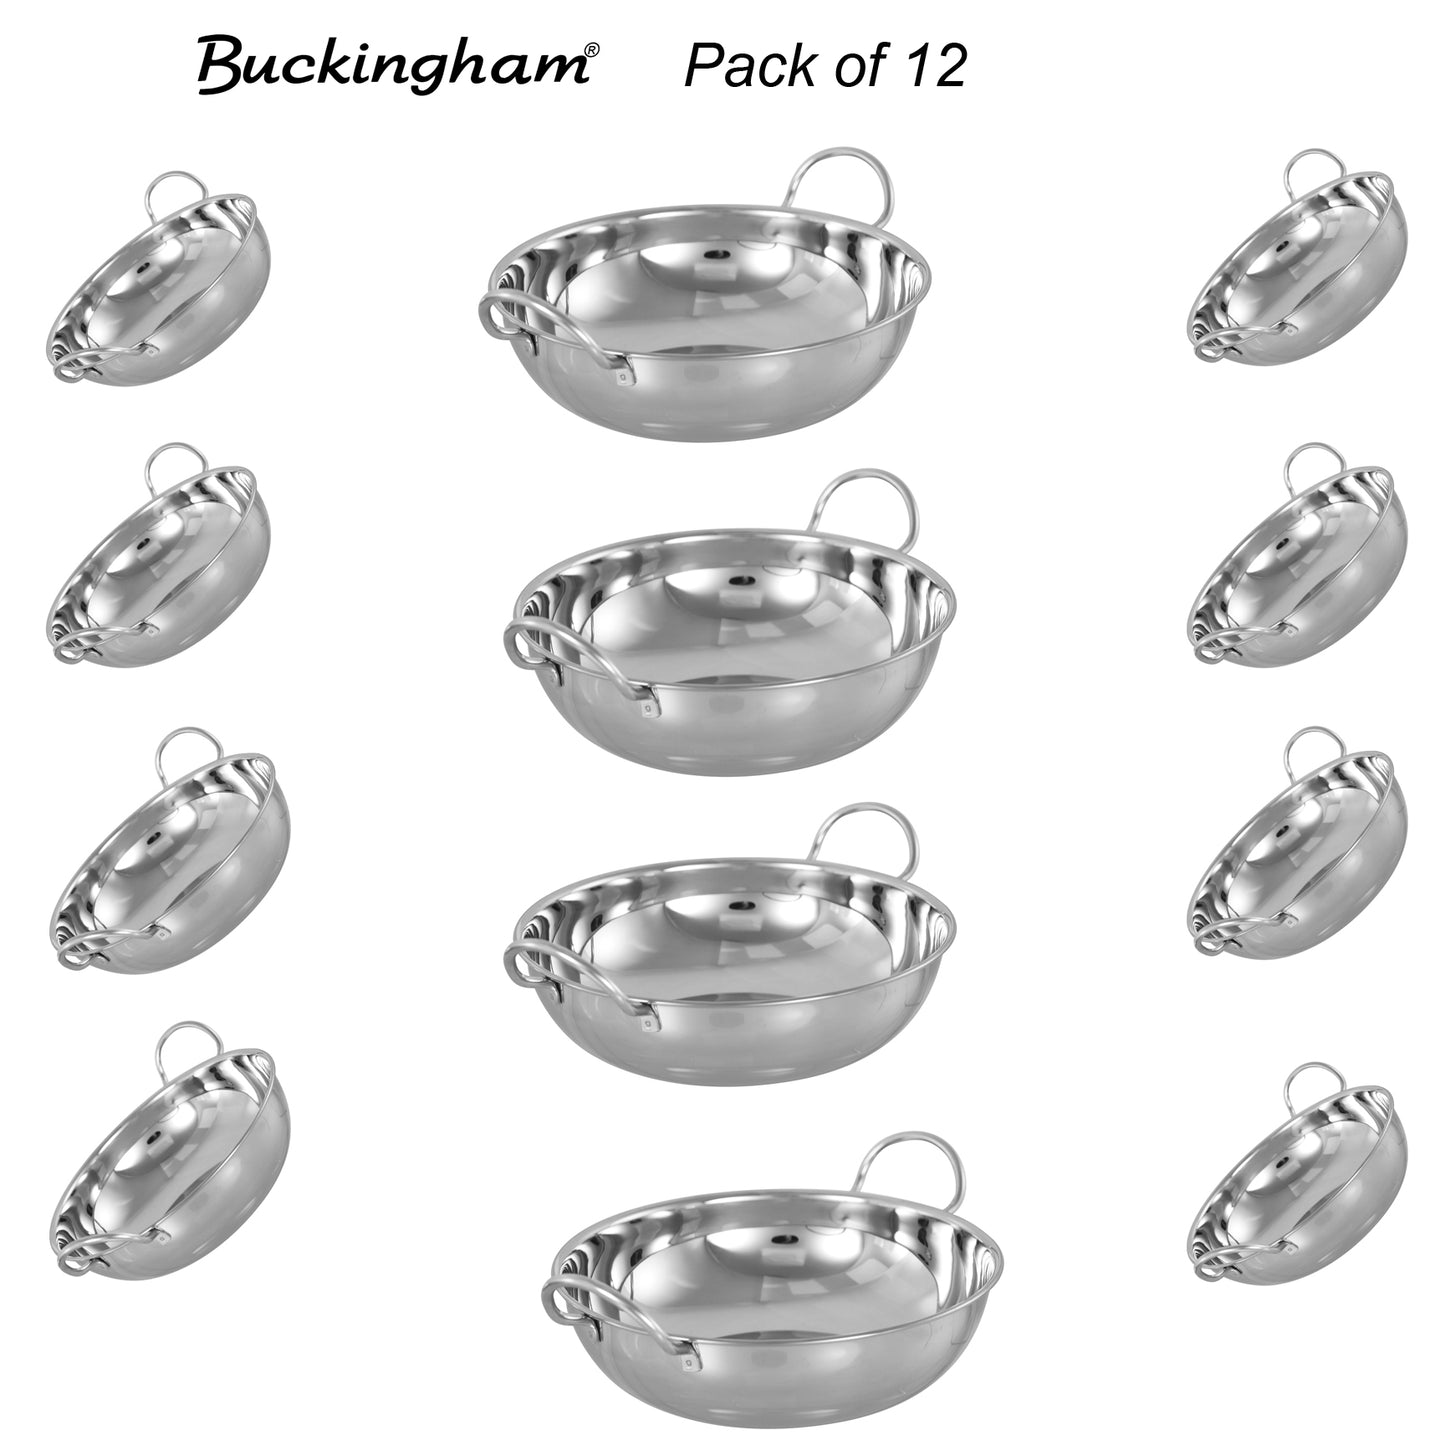 Buckingham Stainless Steel Balti Dish Indian Curry Food Serving Dish 17 cm, Pack of 12